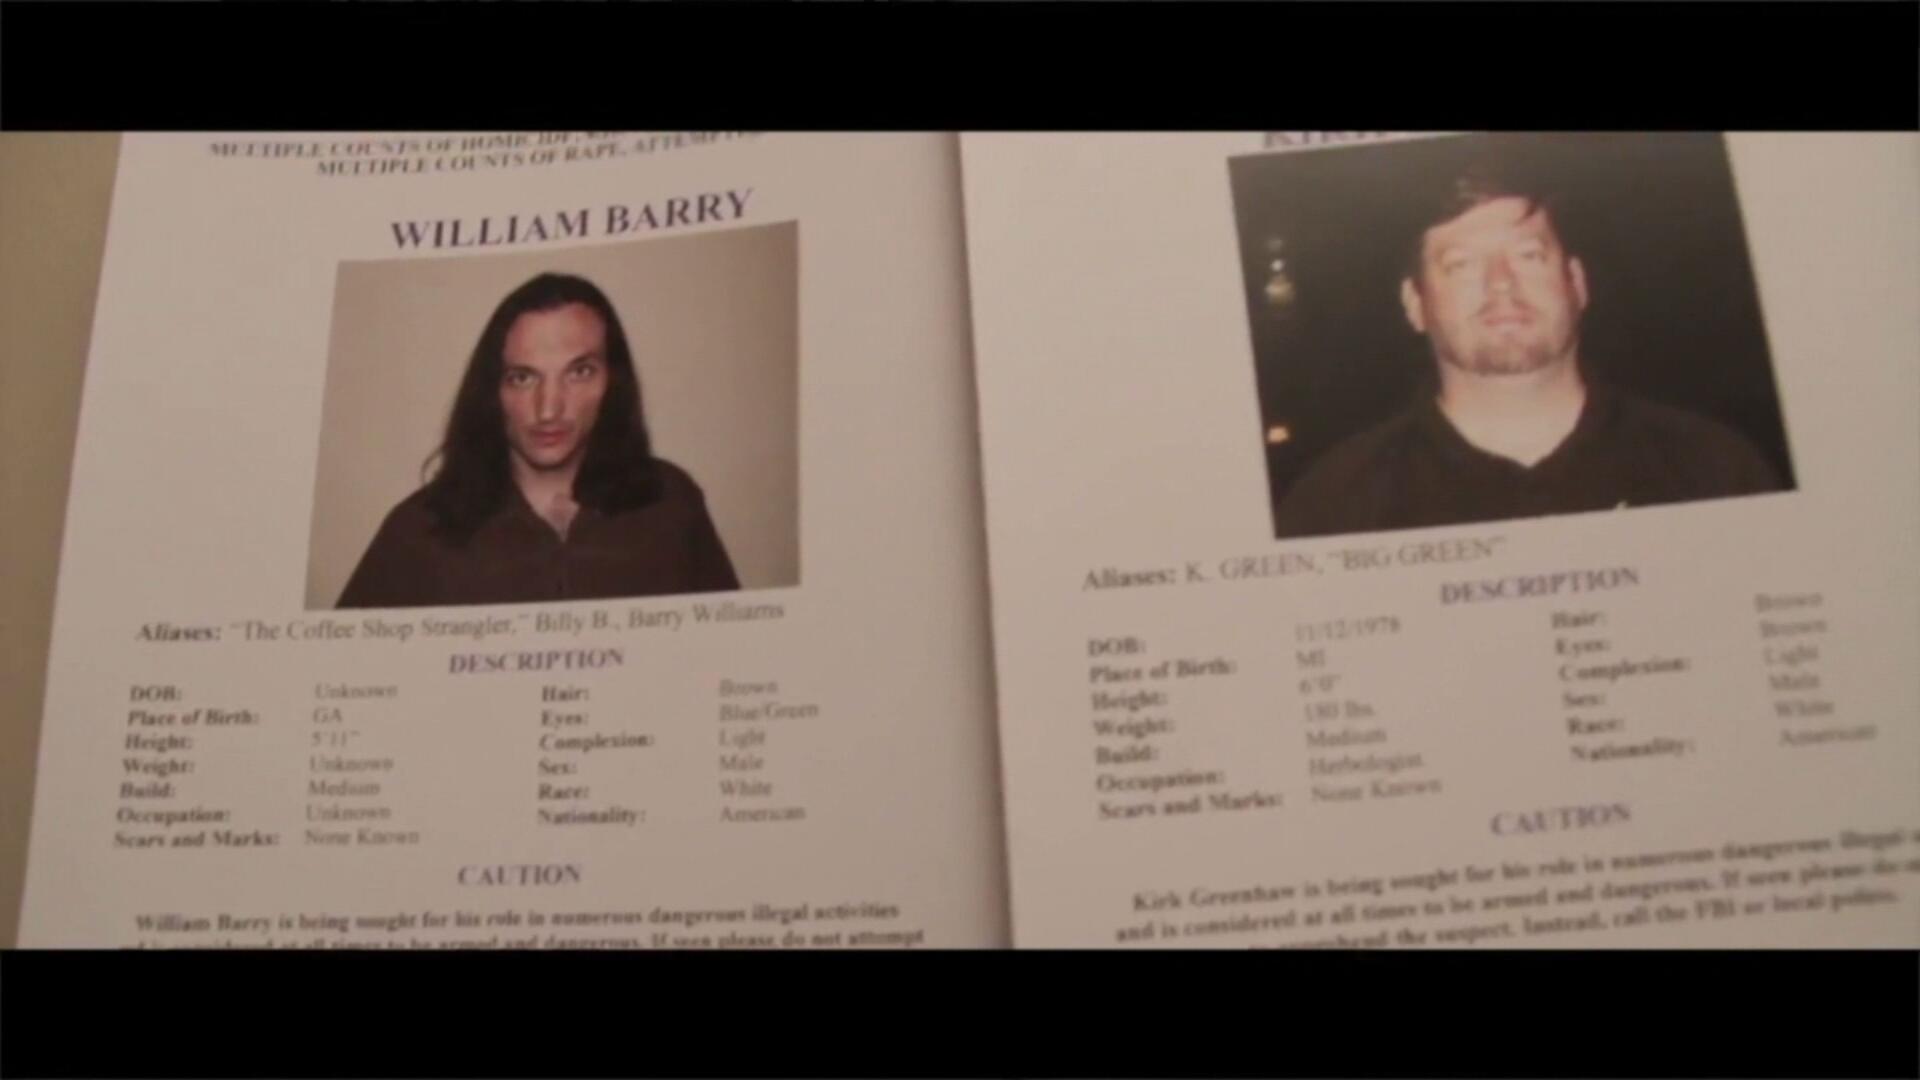 William among the FBI's Most Wanted in the movie Masked